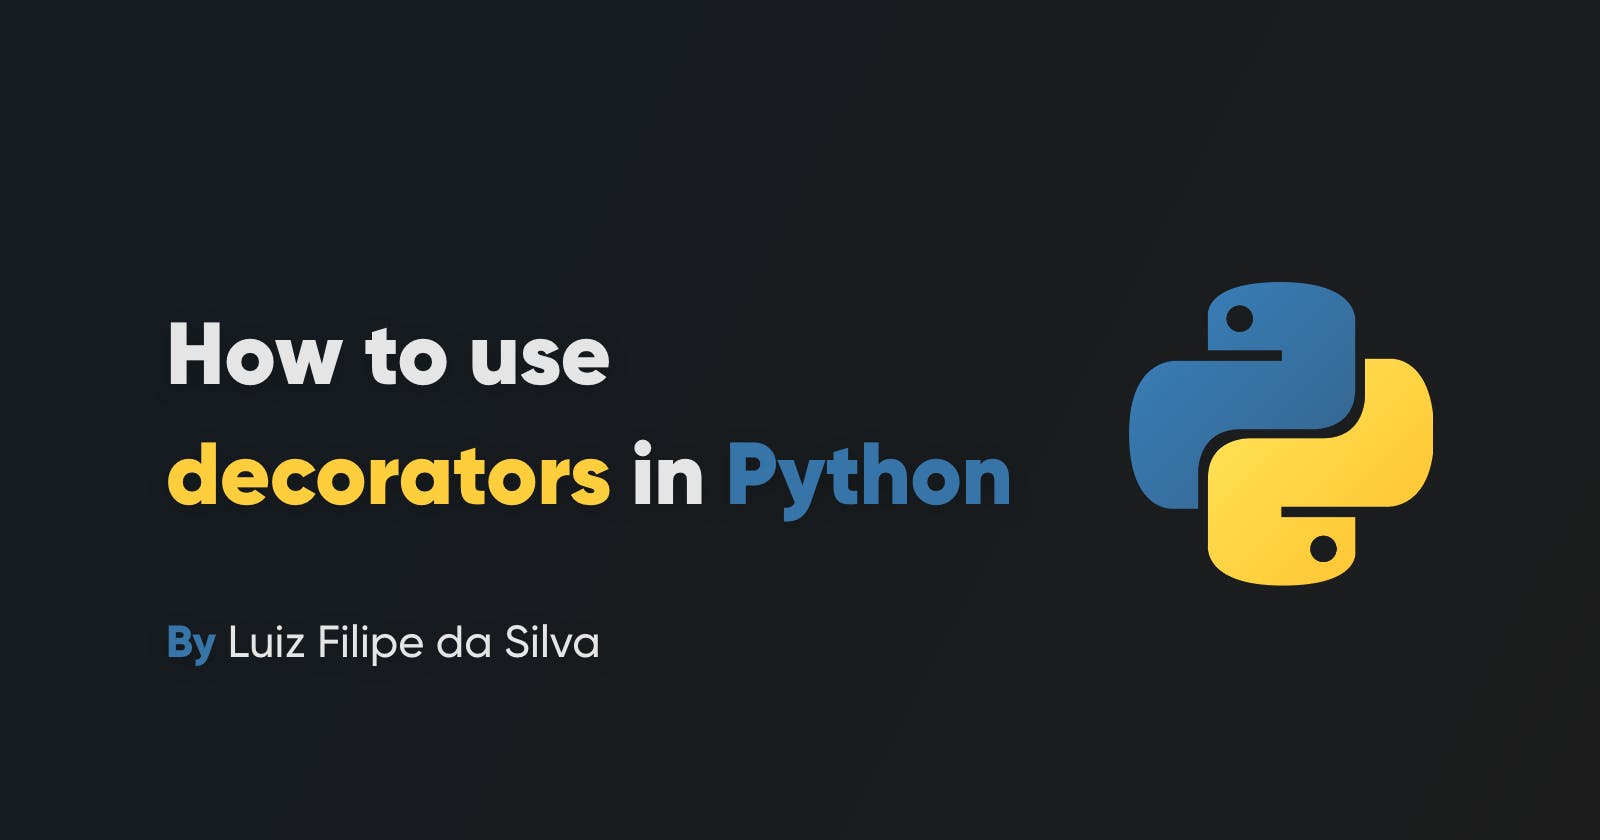 How to use decorators in Python